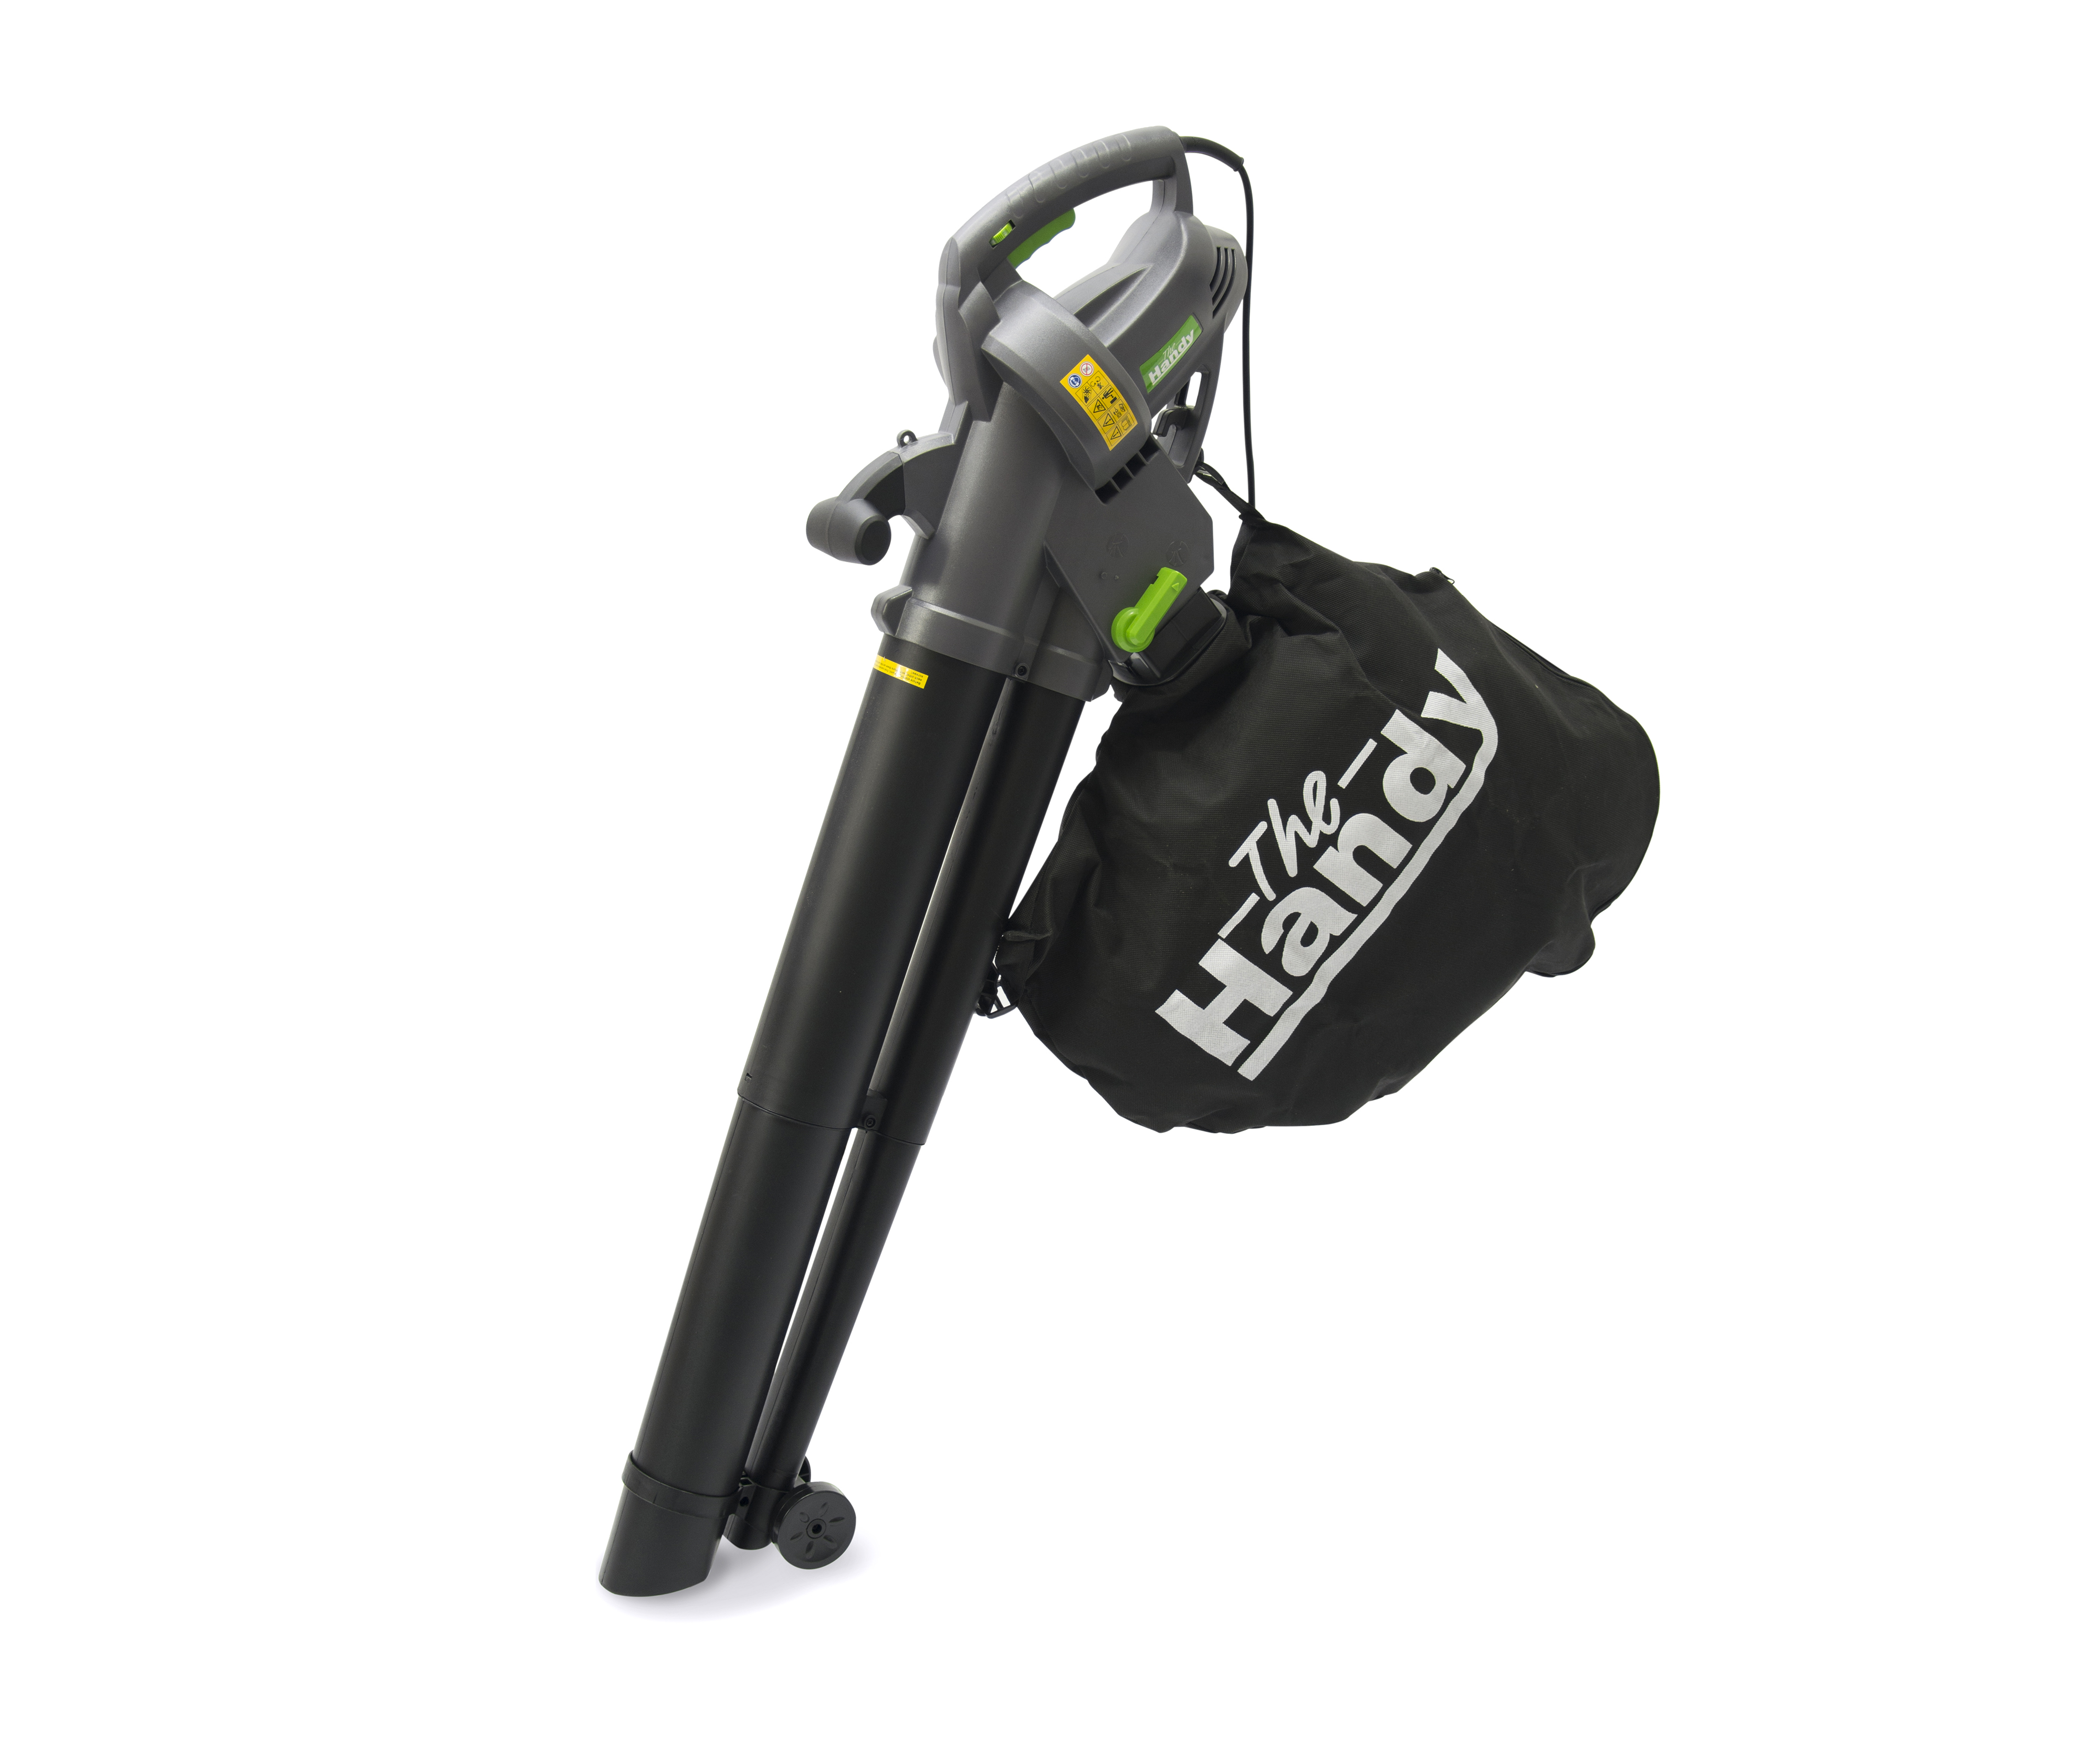 The Handy 167mph (270km/H) Variable Speed Garden Blower & Vacuum